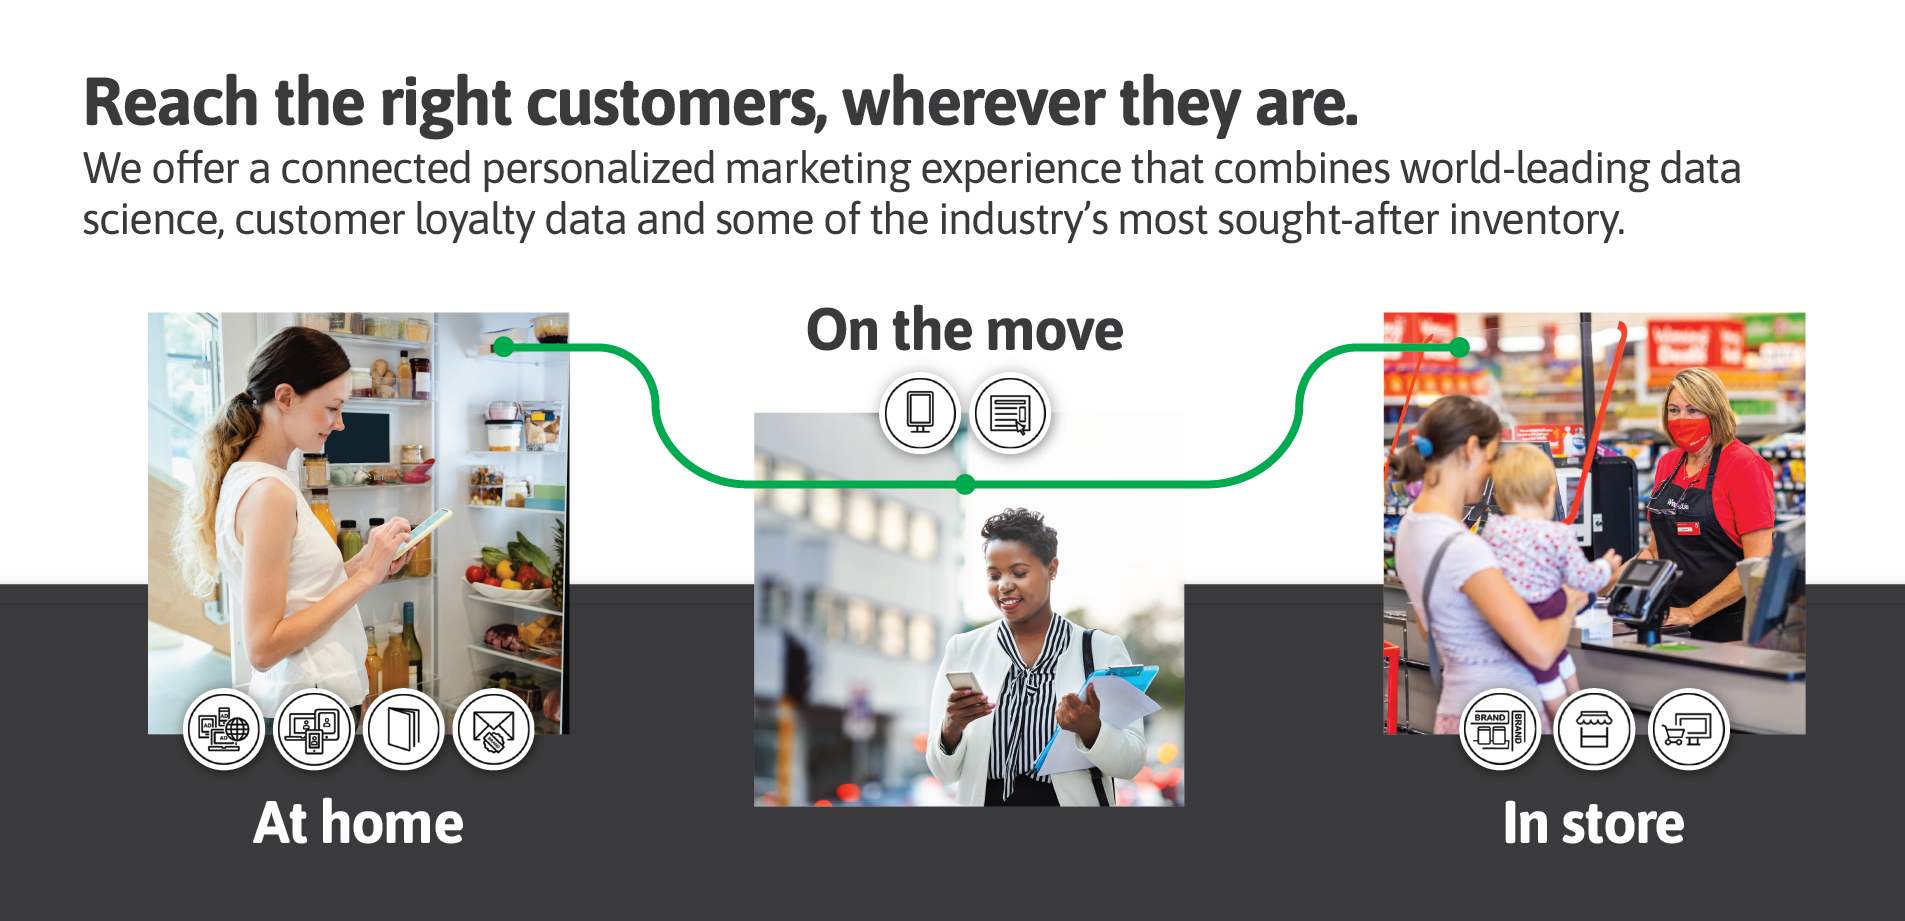 connected personalised marketing experience - customer loyalty data